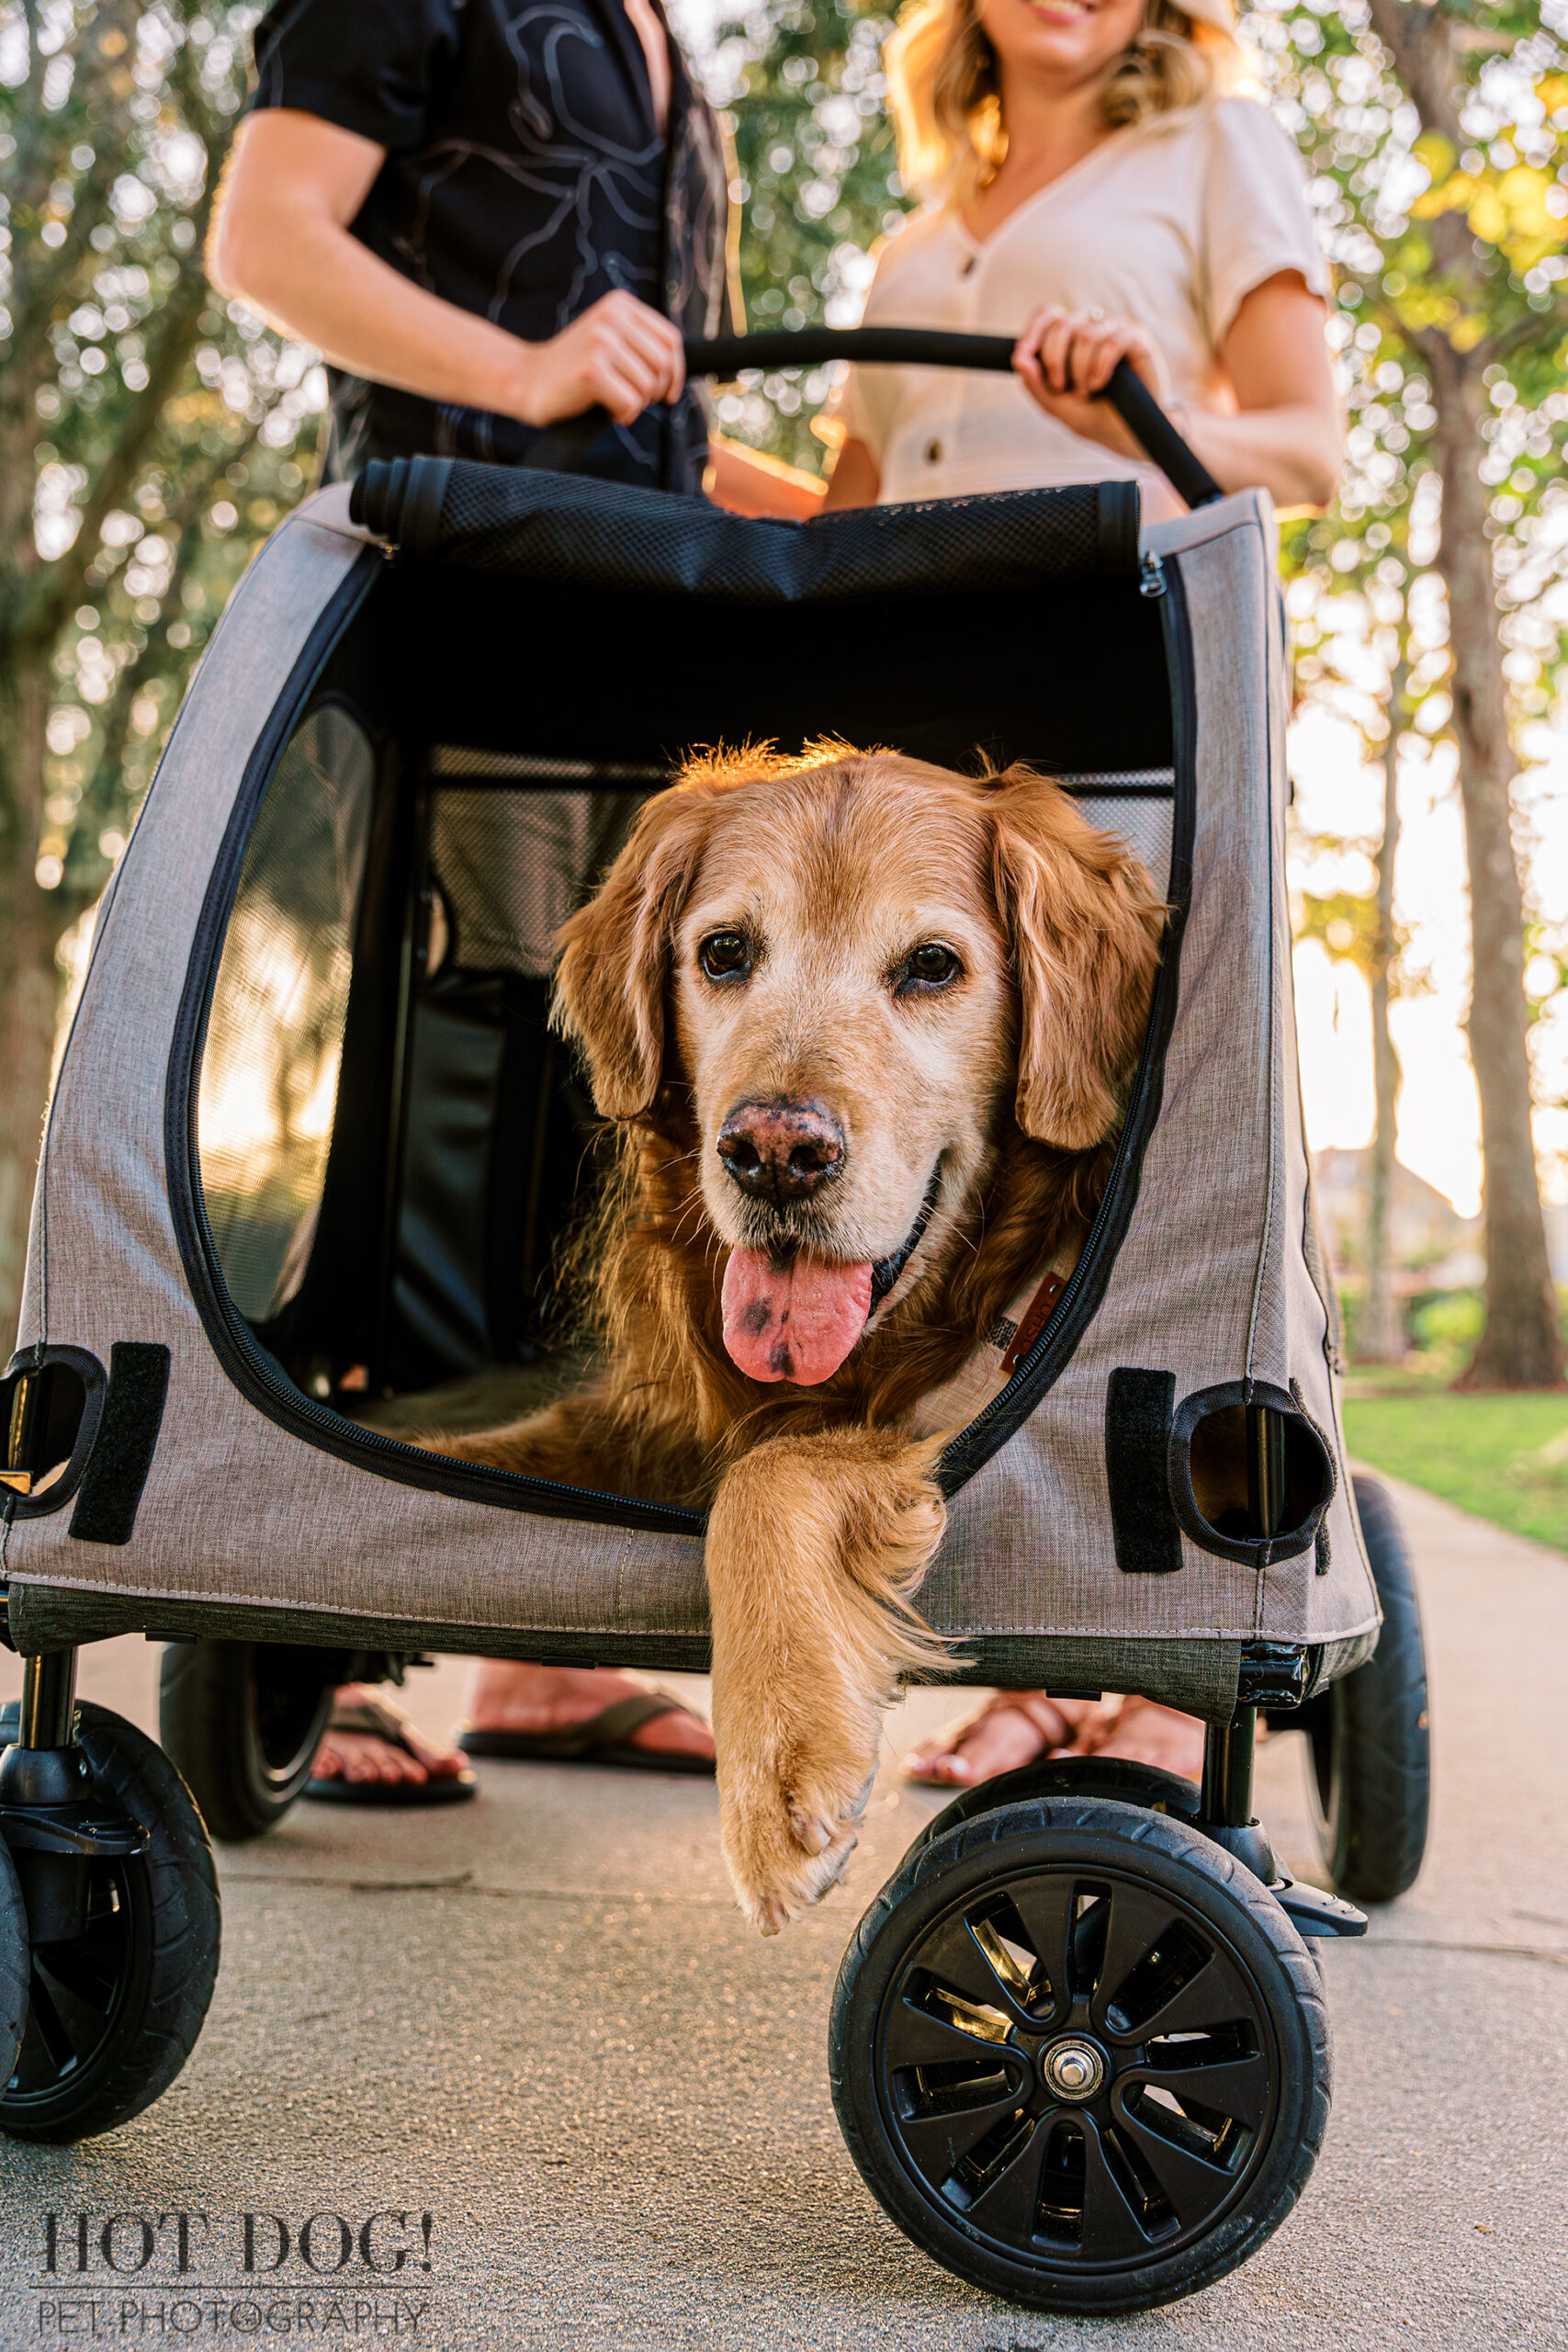 Golden Sunset Stroll: Osho, the senior golden retriever, enjoys a peaceful evening walk in his stroller with his parents, their silhouettes painting a heartwarming picture against the setting sun in Celebration, Florida. (Photo by Hot Dog! Pet Photography)